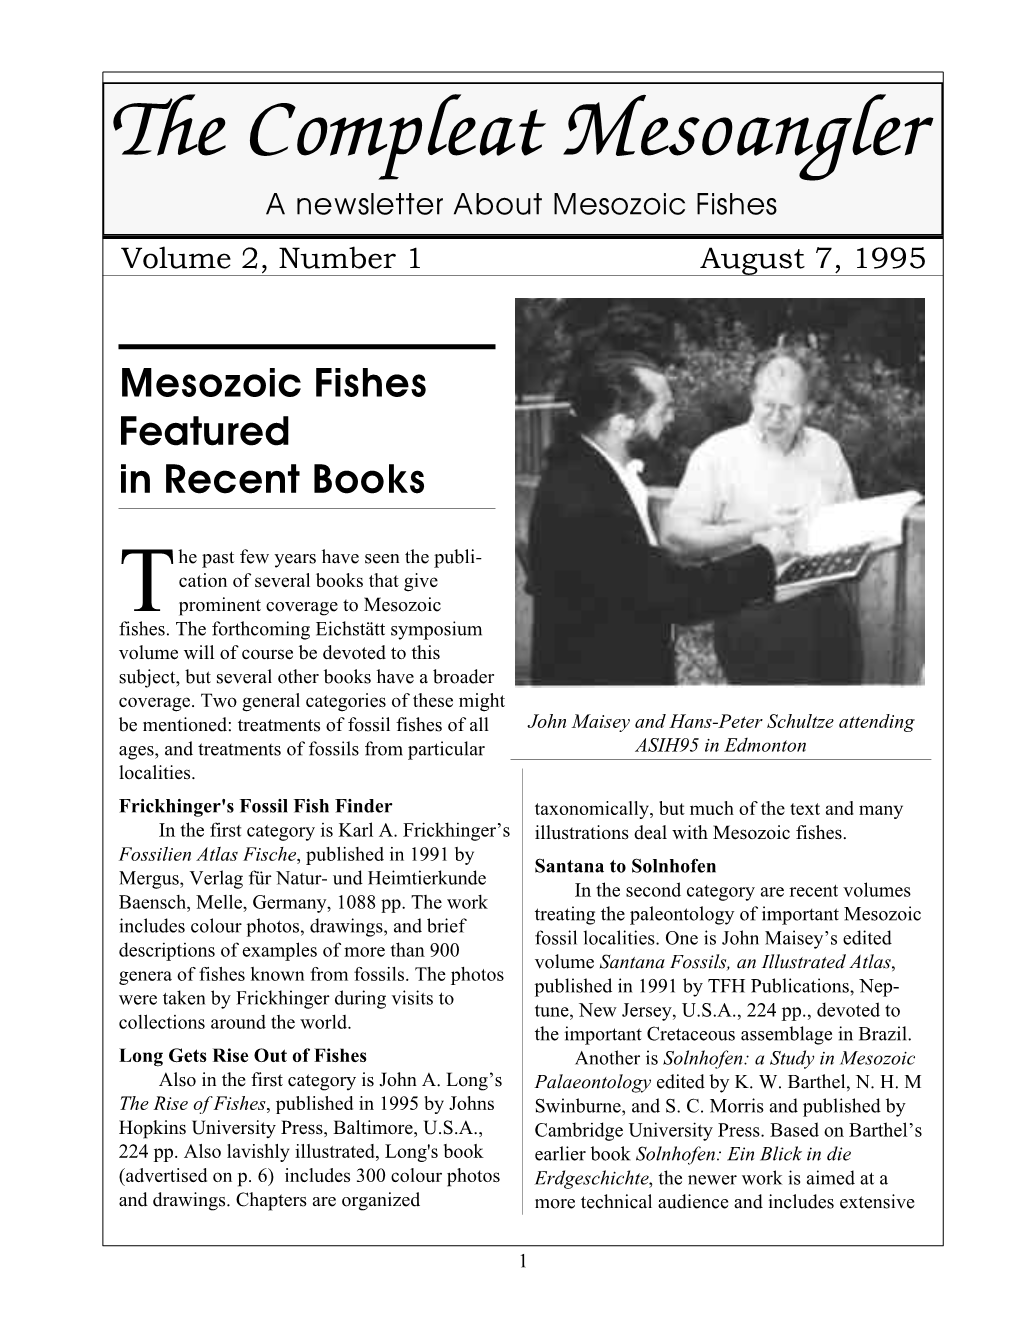 The Compleat Mesoangler a Newsletter About Mesozoic Fishes Volume 2, Number 1 August 7, 1995